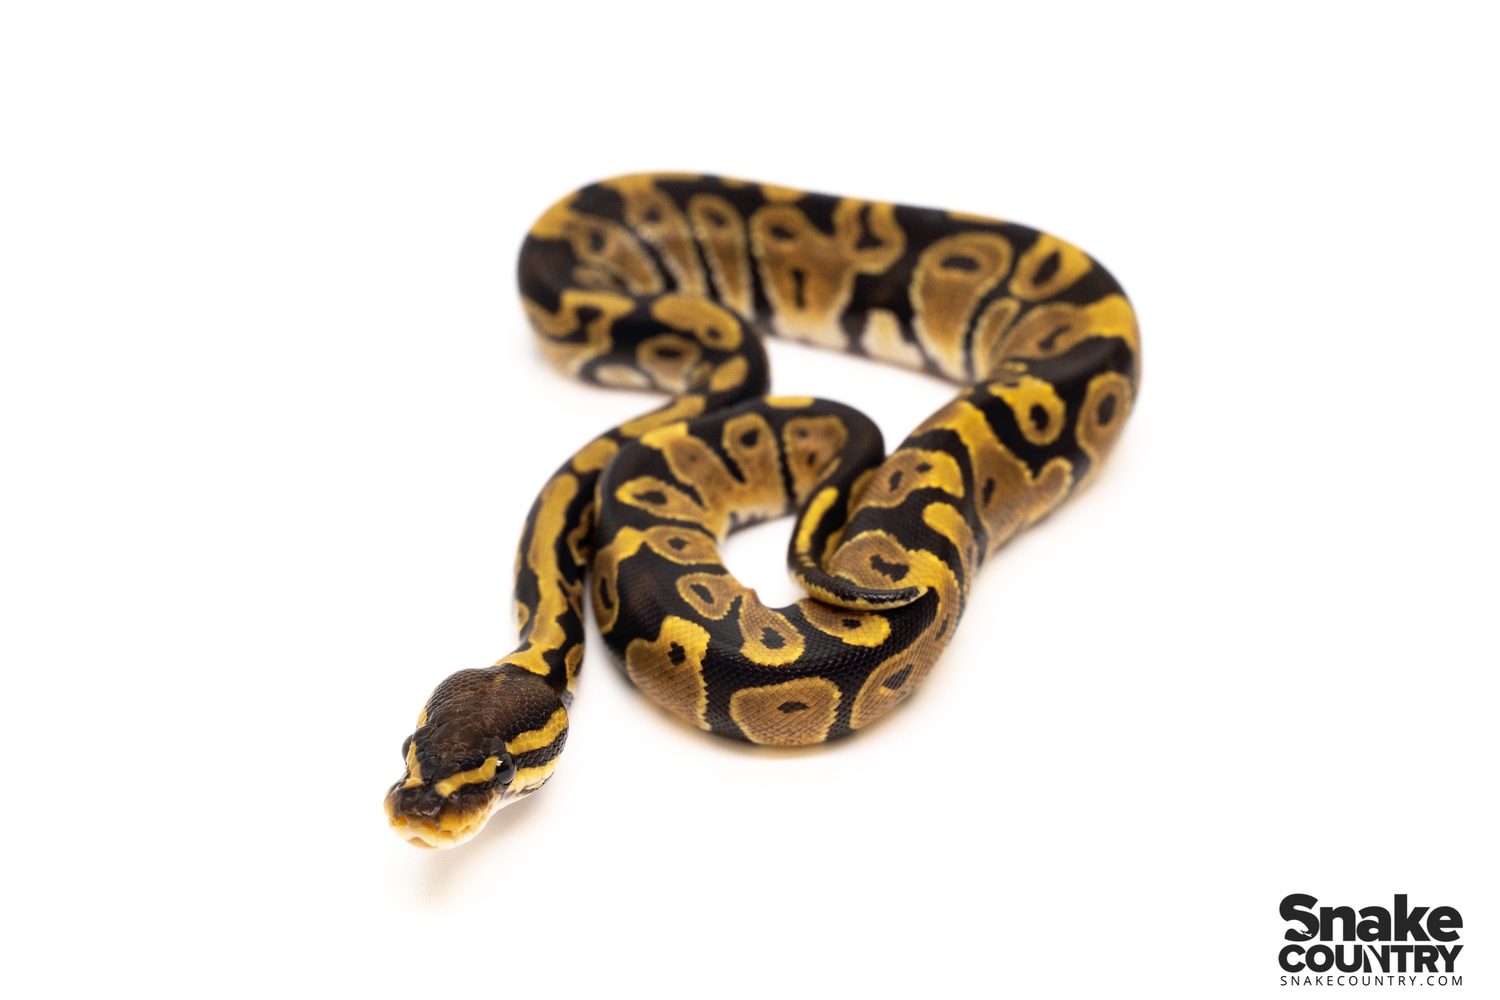 Cypress Ball Python by Snake Country1